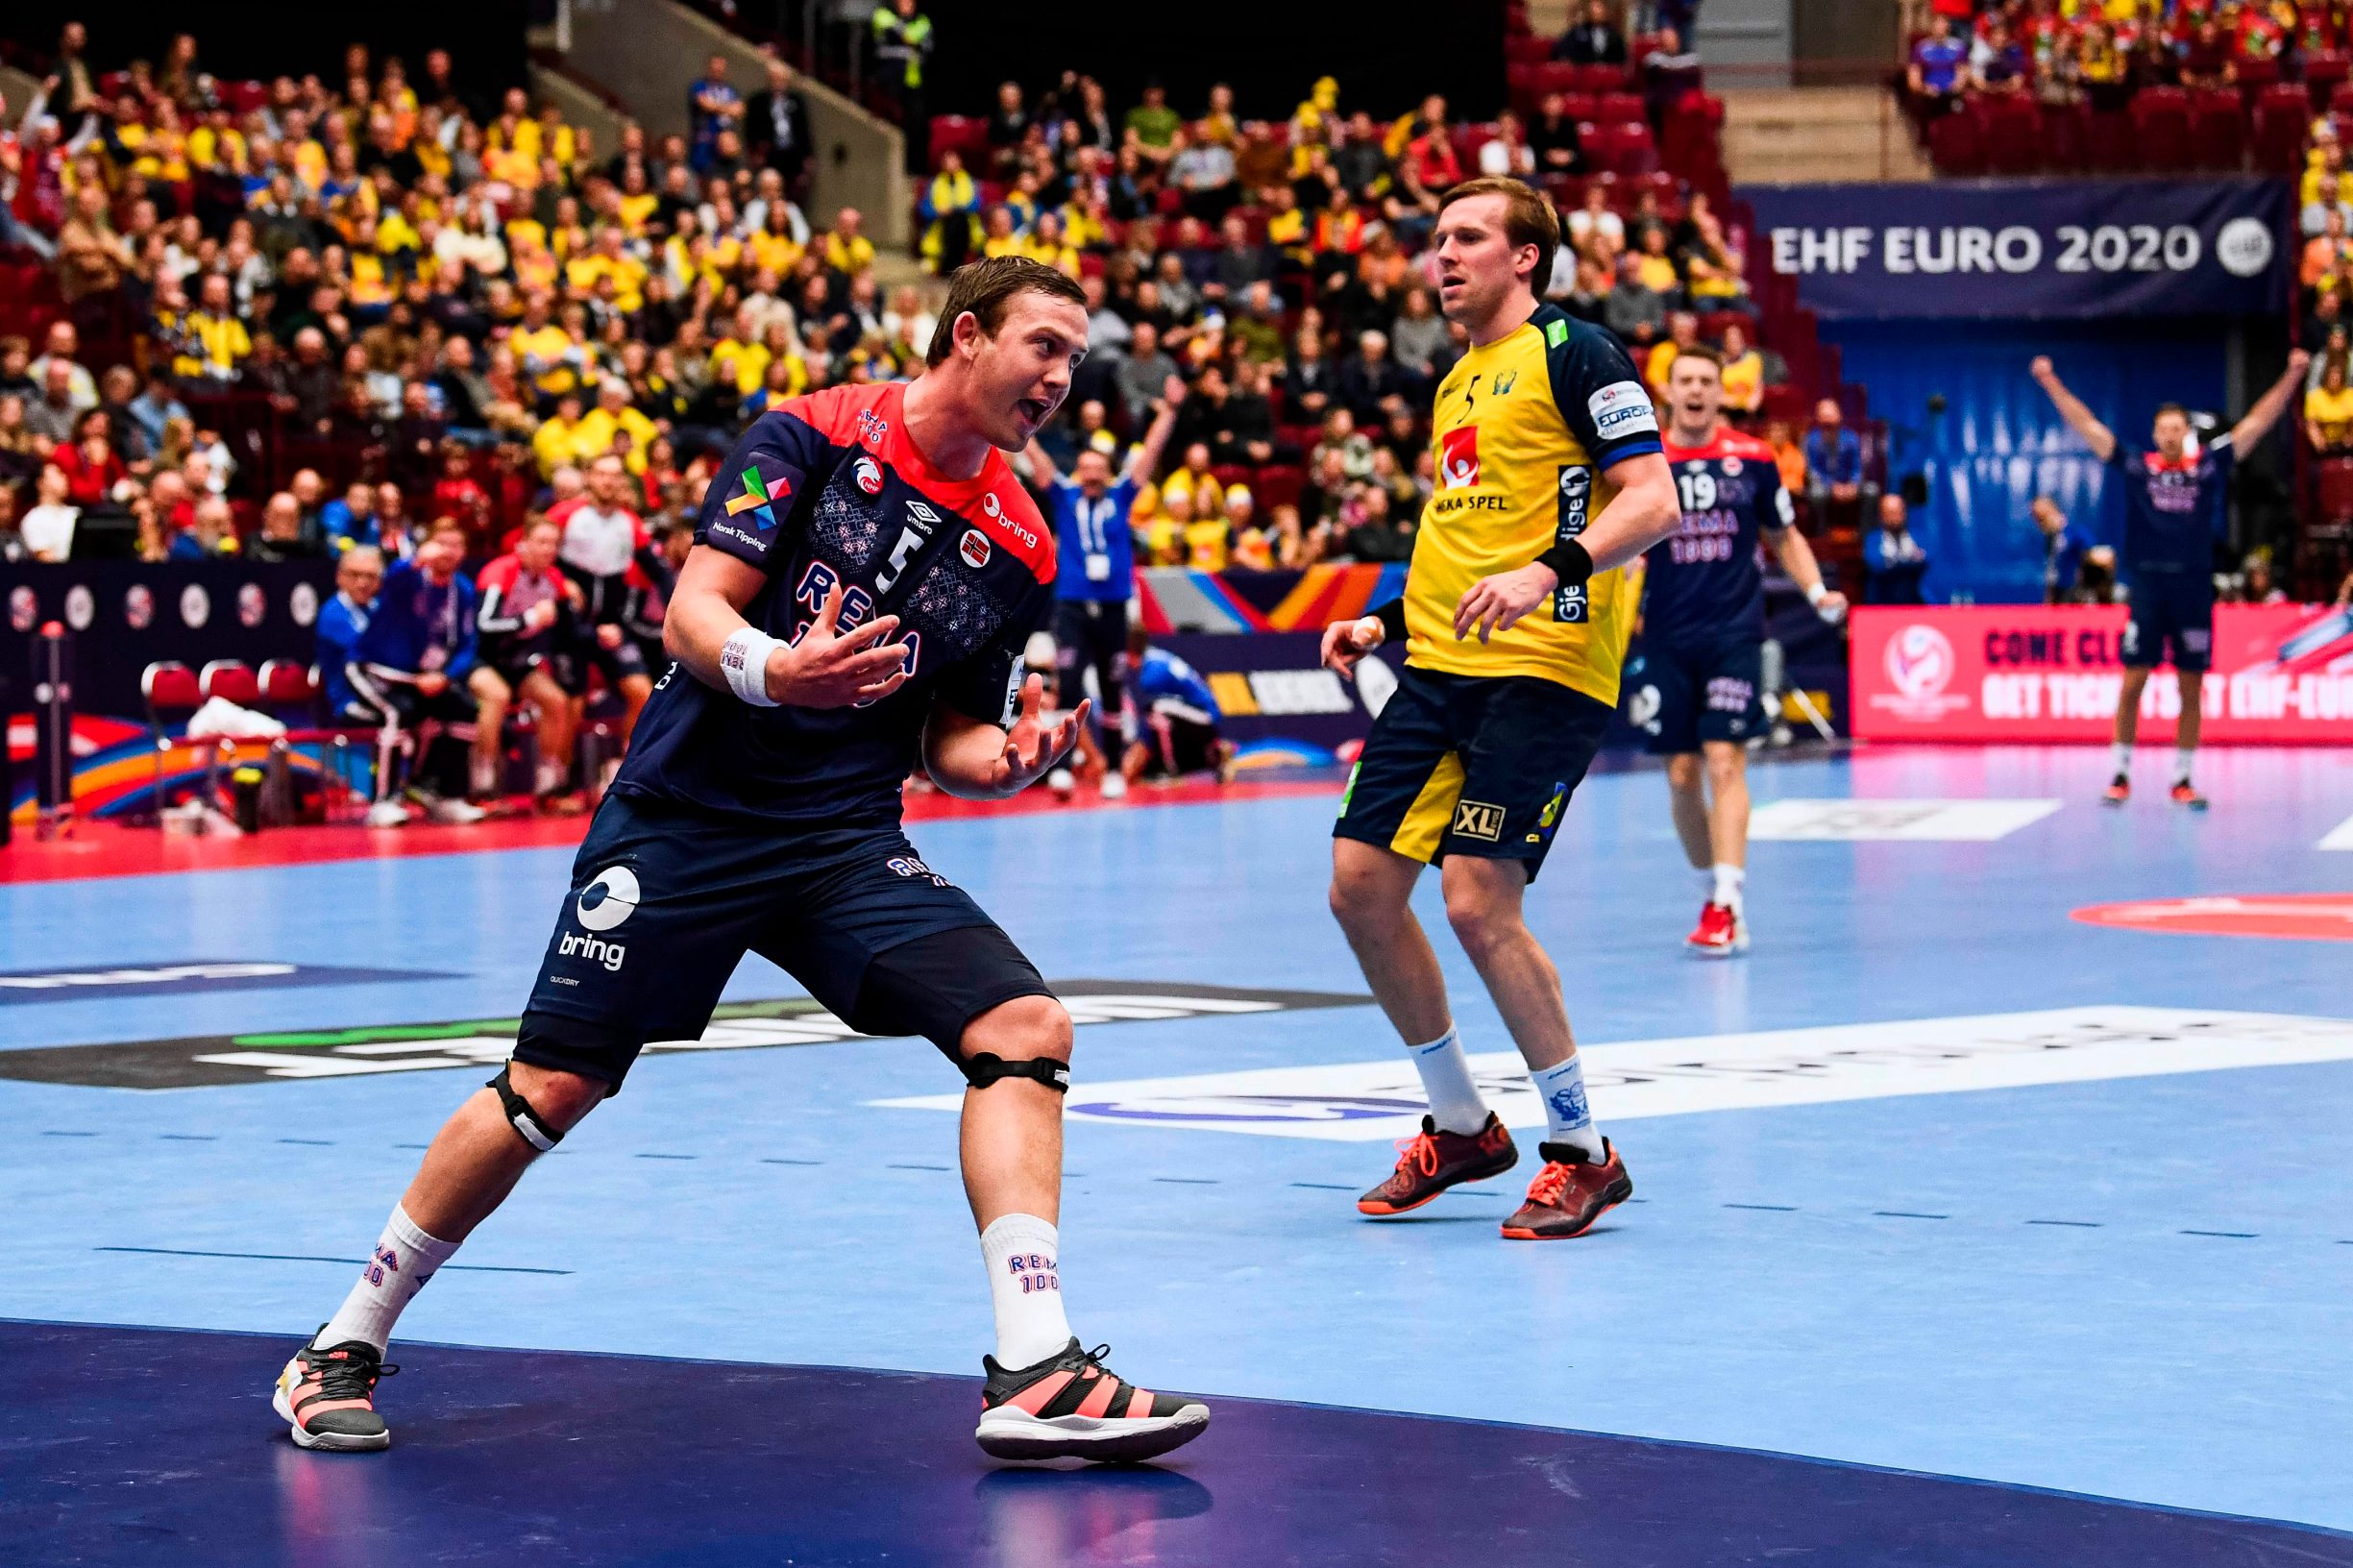 Norway's Sander Sagosen celebrates after scoring during the Men's European Handball Championship, main round match between Norway and Sweden in Malmoe, Sweden on January 19, 2020. (Photo by Jonathan NACKSTRAND / AFP)